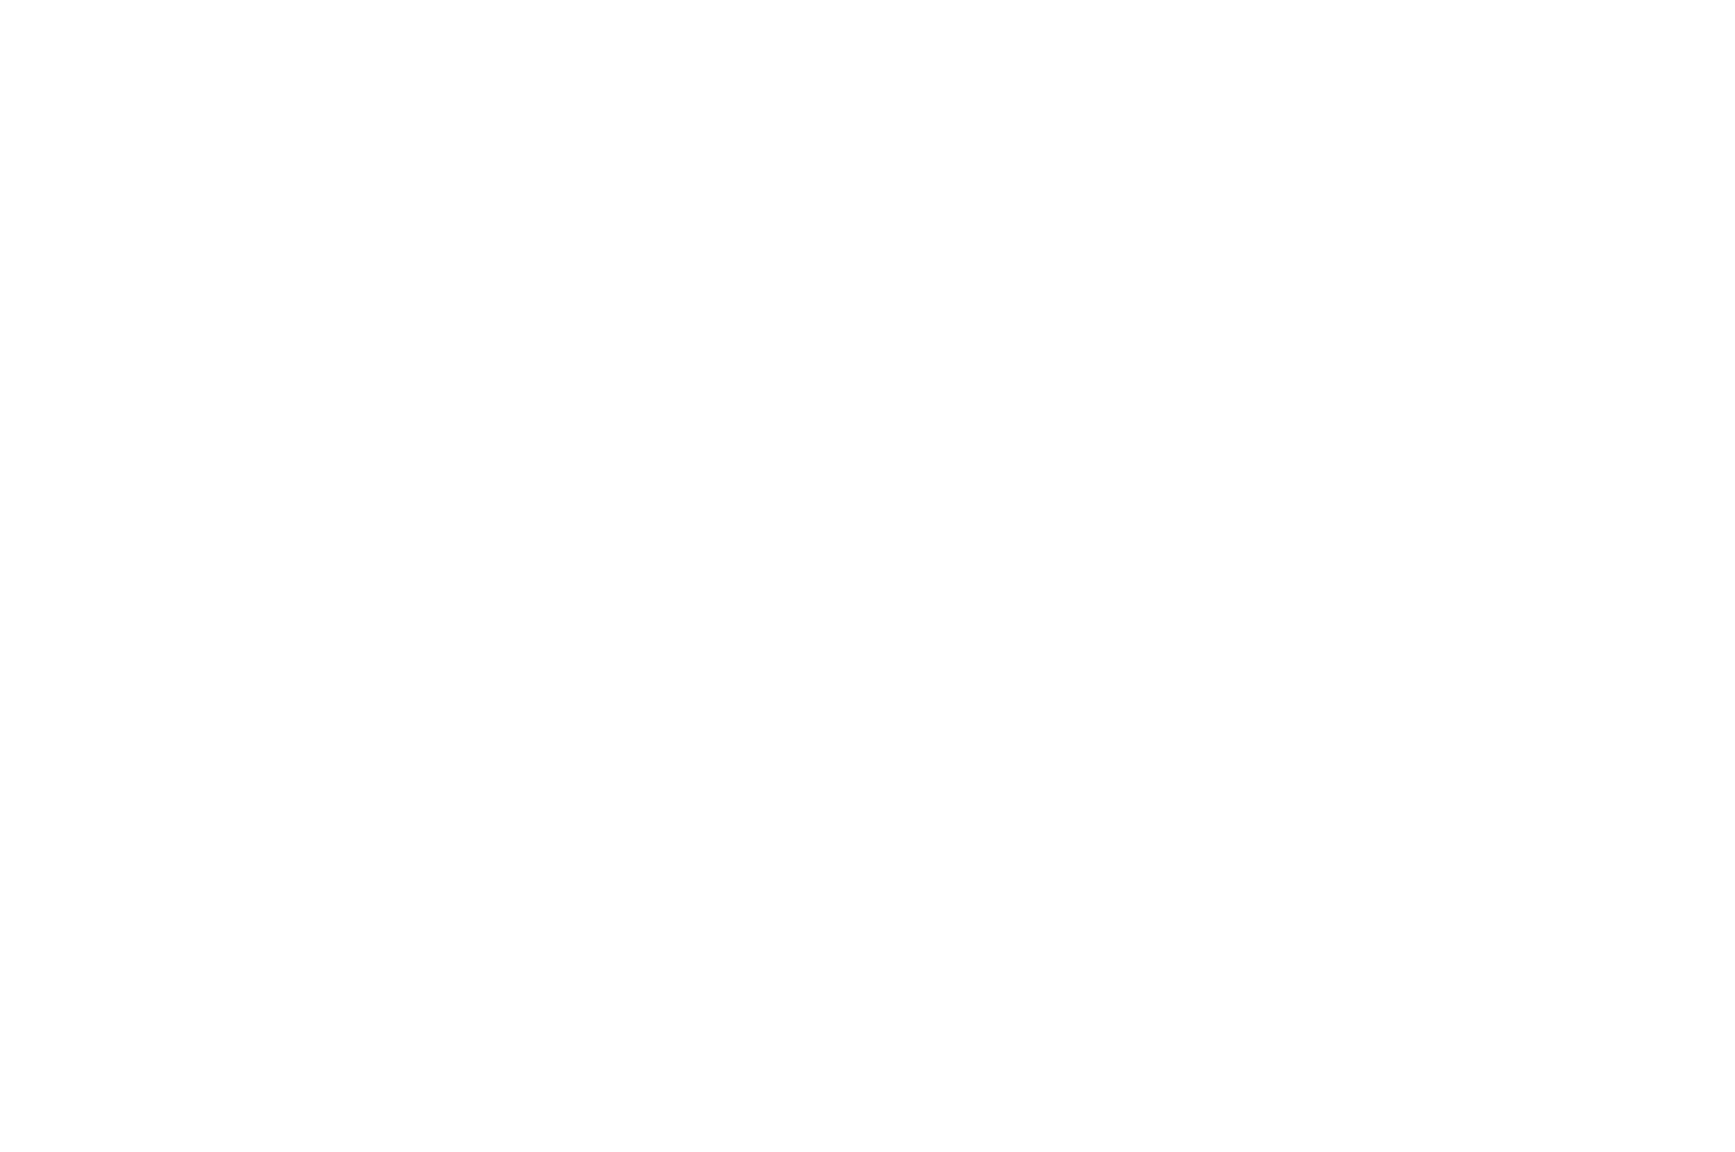 Best Feature Finalist - ICONIC IMAGES FILM FESTIVAL - Lithuania 2022(1)